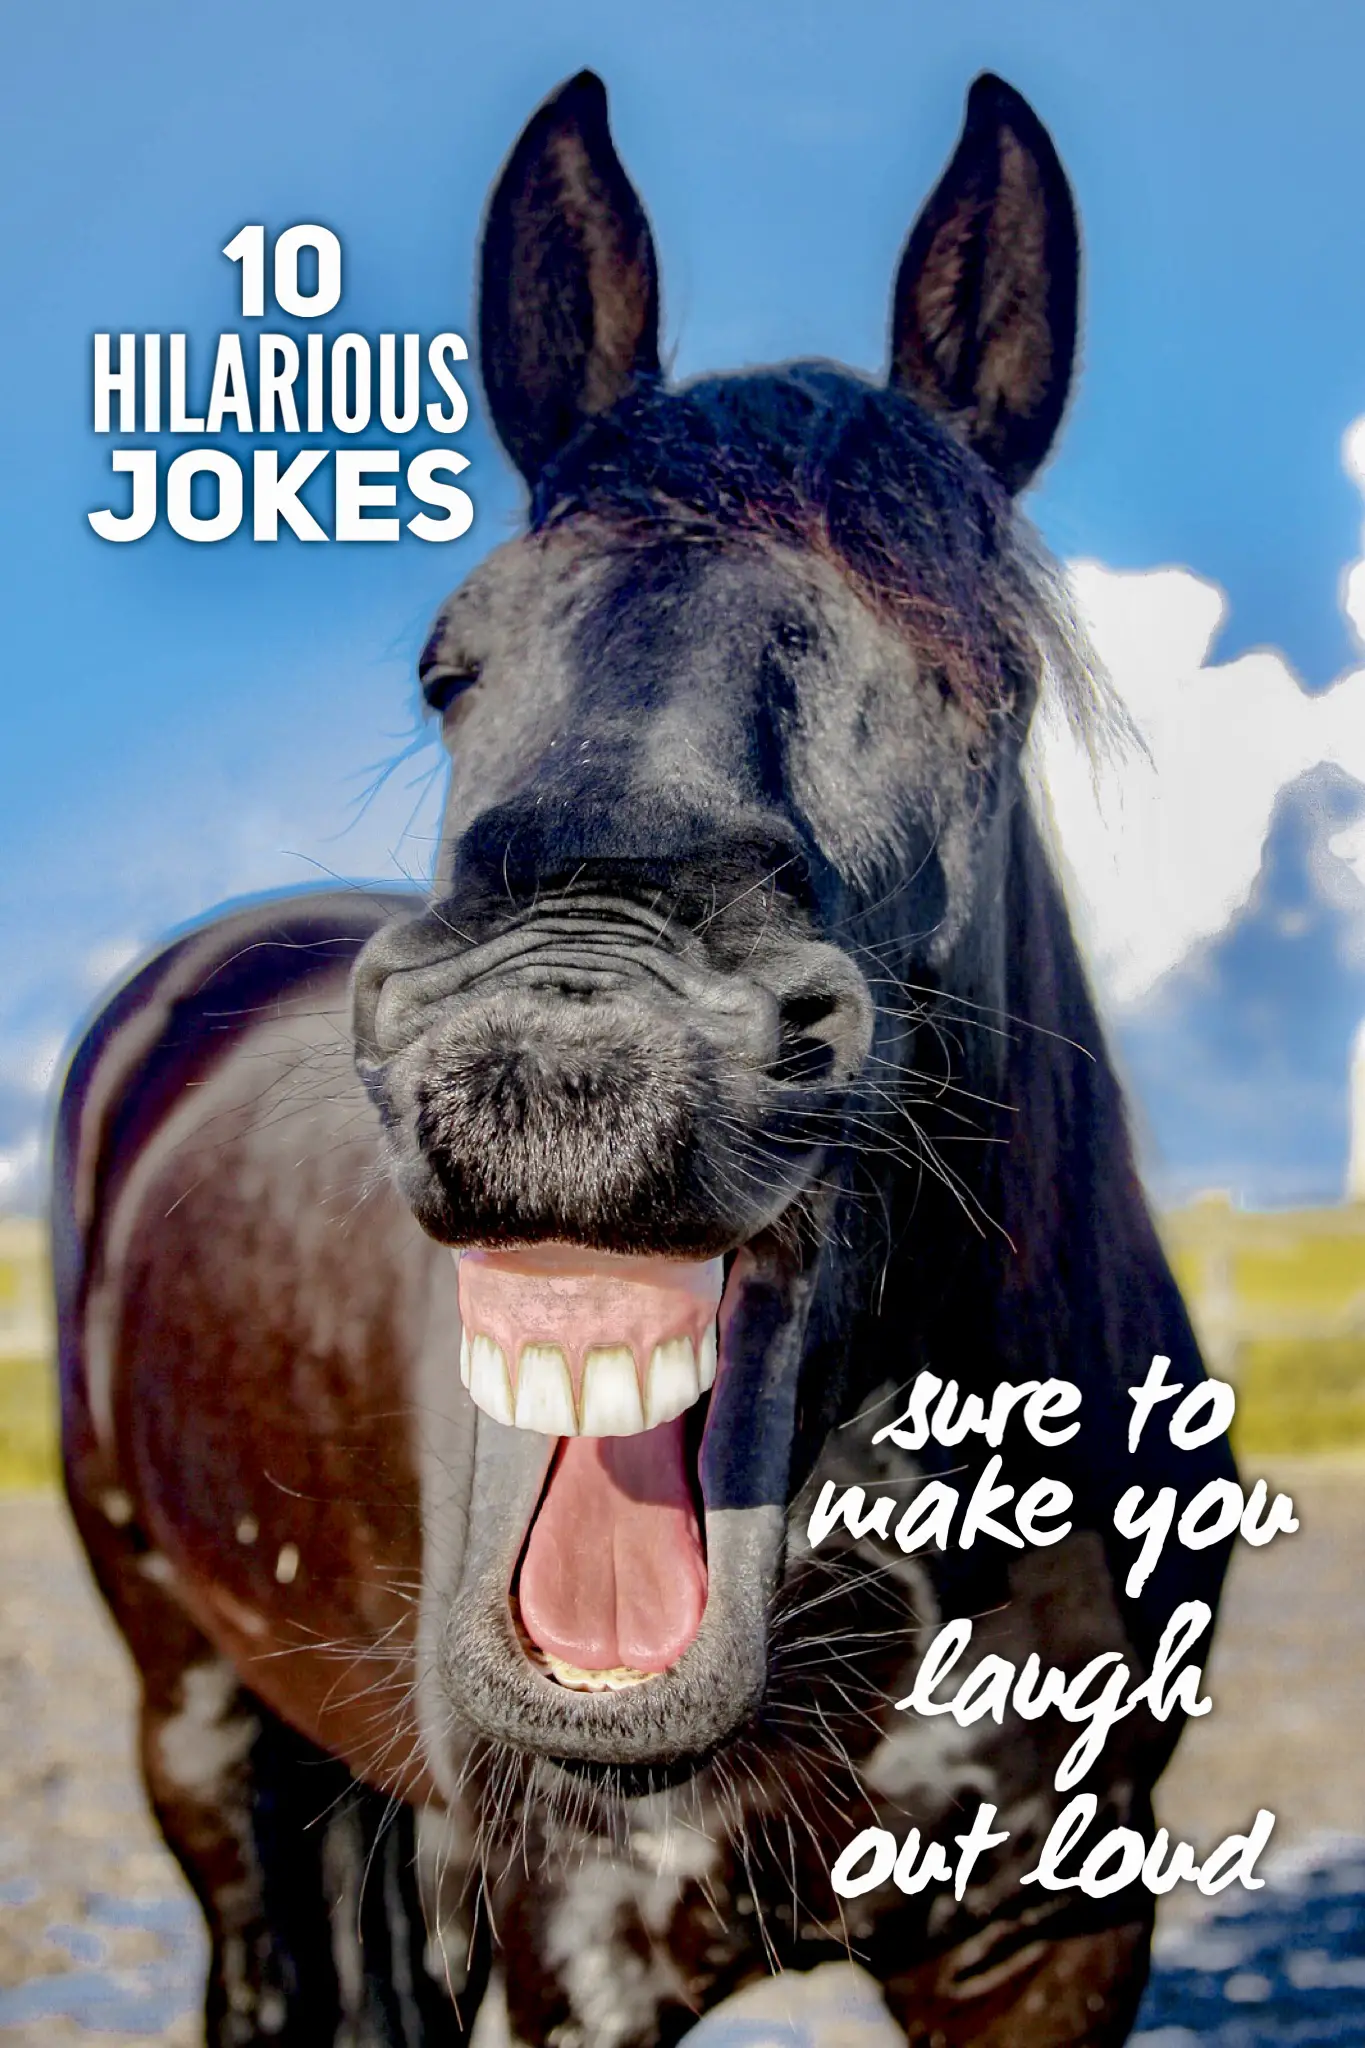 Quotes Hilarious Funny Jokes - Wall Leaflets